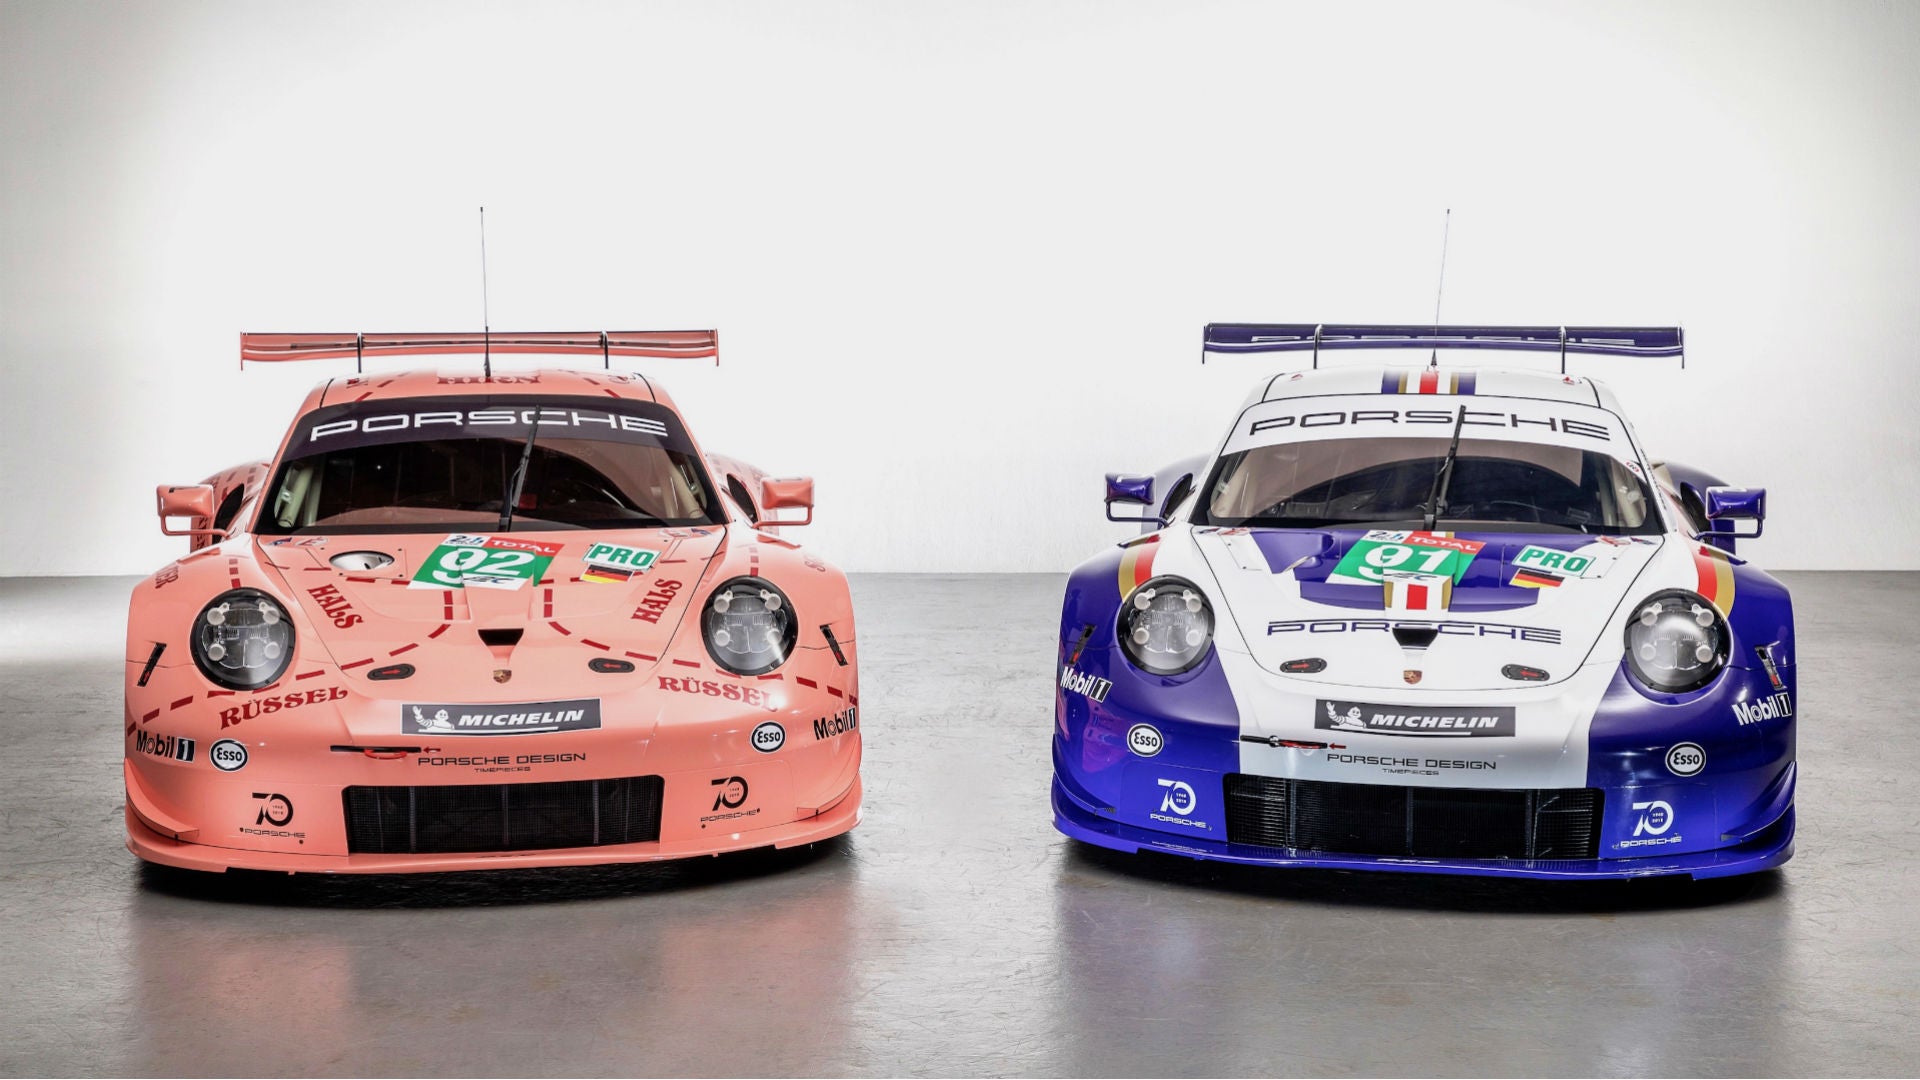 Porsche Brings Back Iconic Pink Pig, Rothmans Liveries for 24 Hours of Le Mans